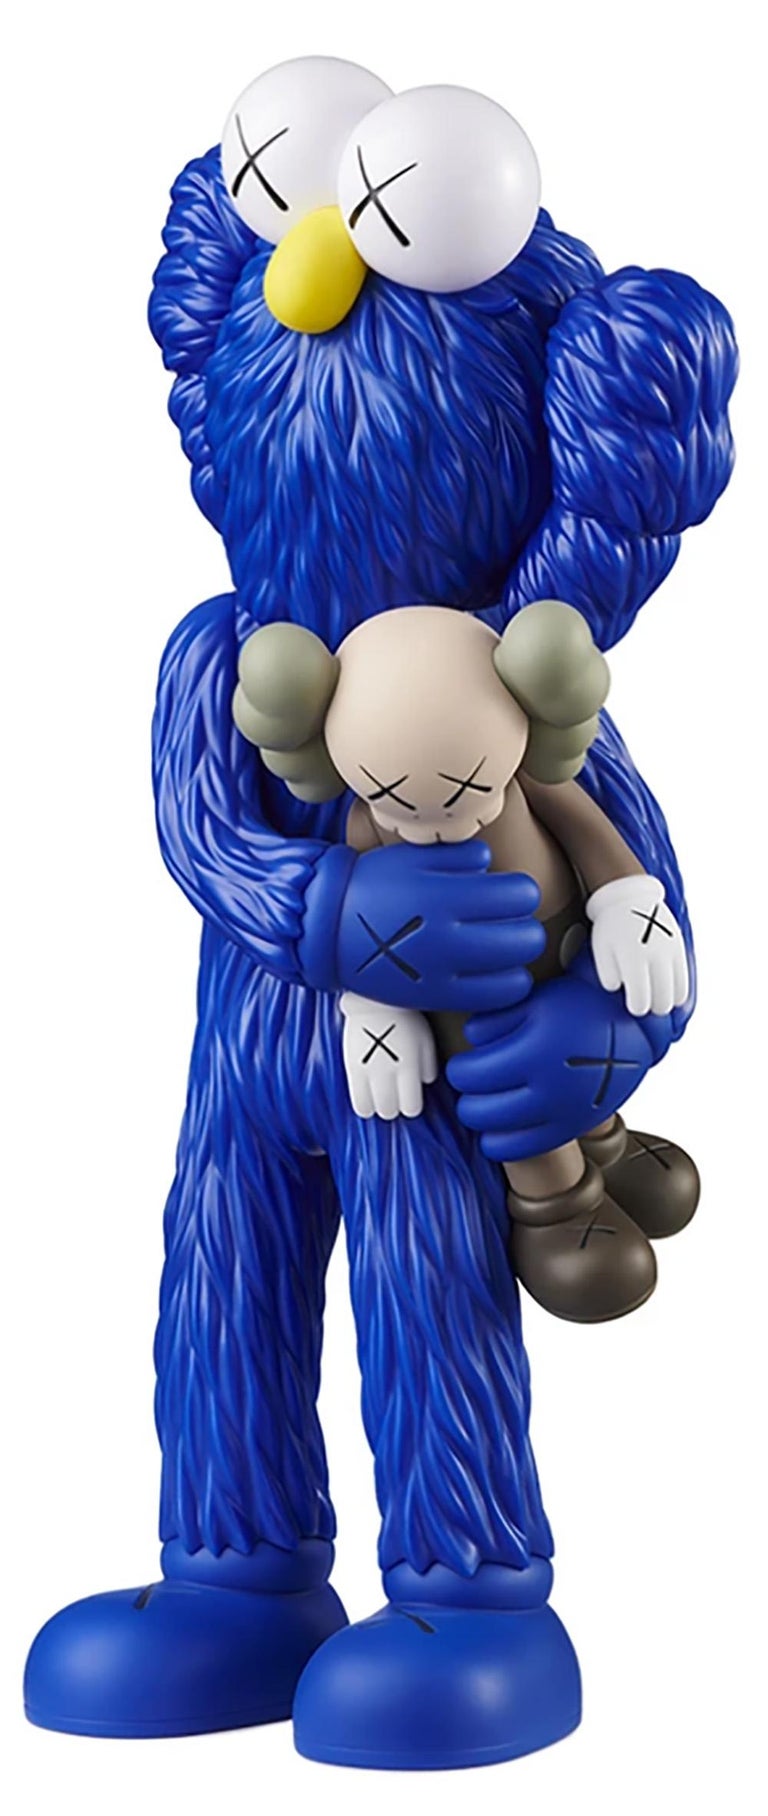 KAWS TAKE (Blue) new & unopened in its original packaging. 

A standout KAWS figurative sculpture and variation of KAWS' large scale TAKE sculpture - a key highlight of the exhibition, 'KAWS BLACKOUT’ at Skarstedt Gallery London in 2019 - the first